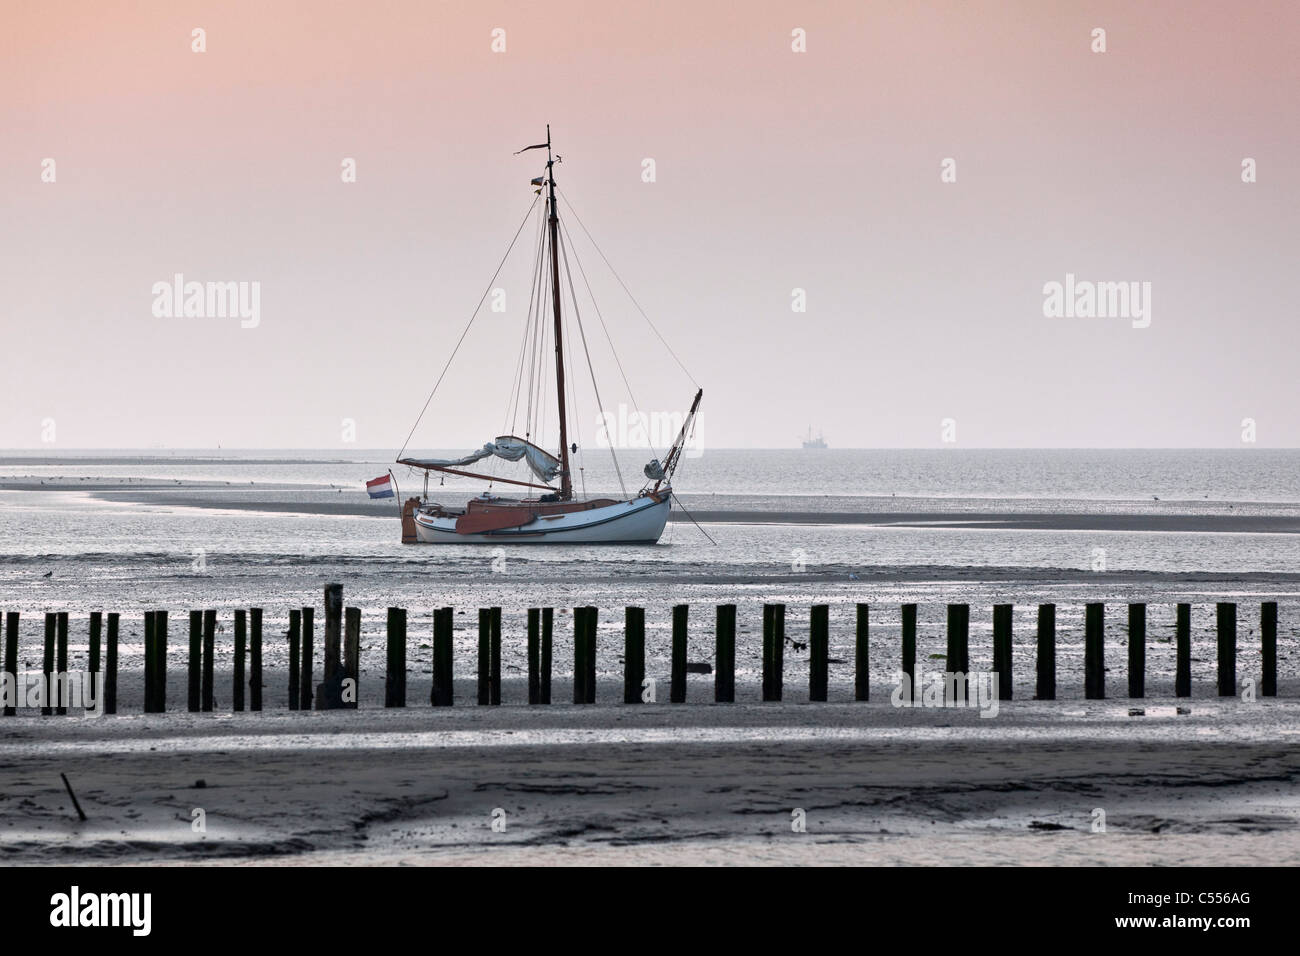 The Netherlands, Nes, Ameland Island, belonging to Wadden Sea Islands. Sailing boat on mud flat in harbour. Stock Photo